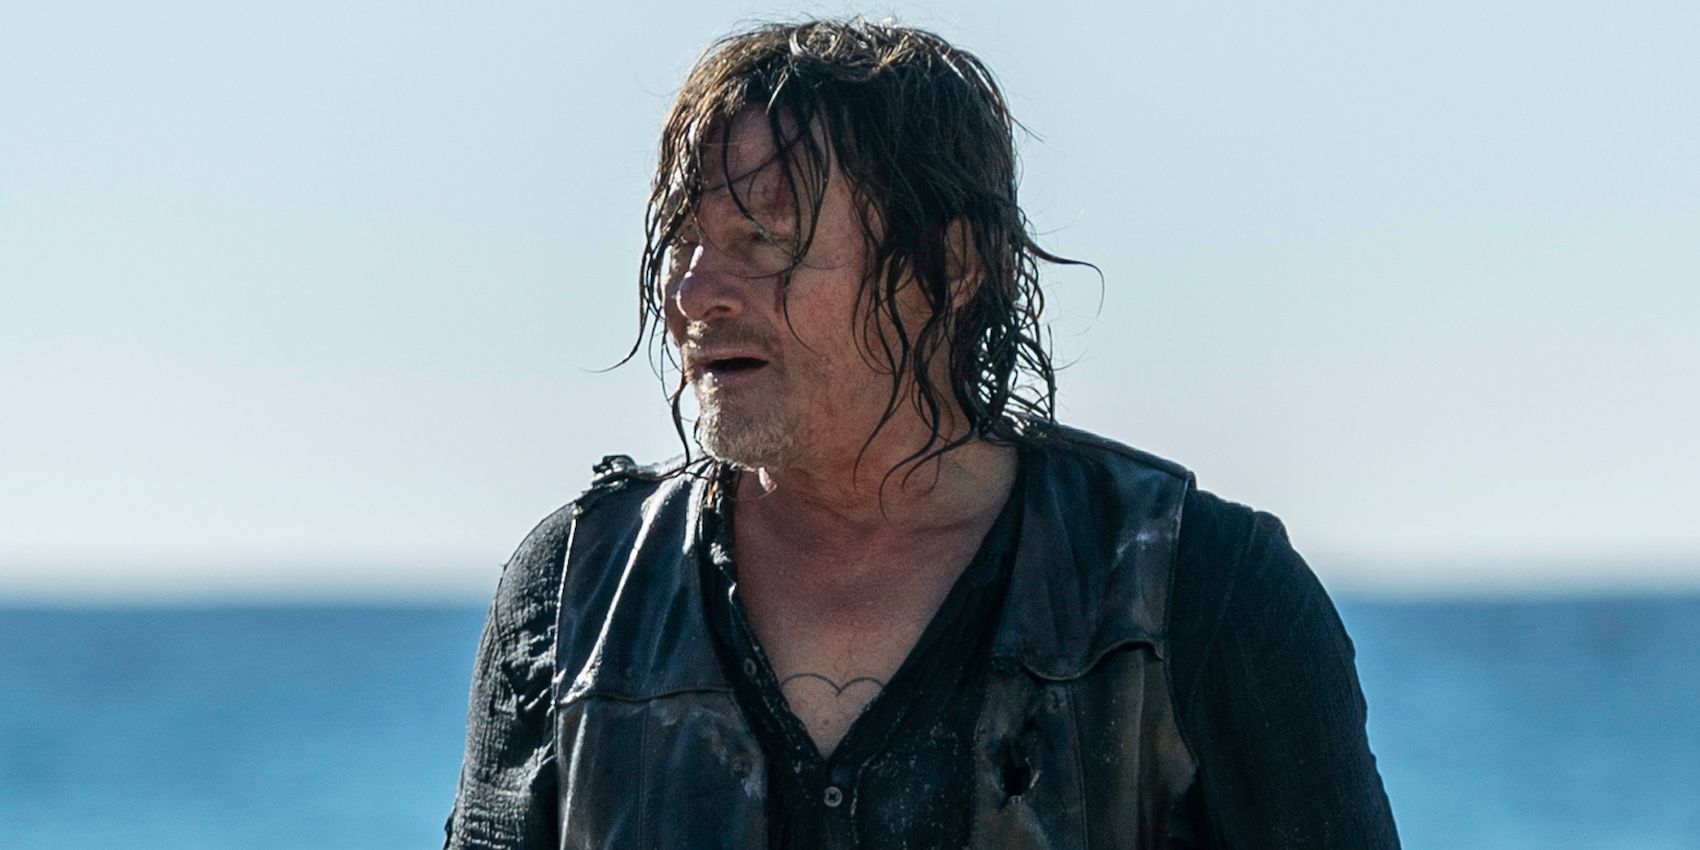 Norman Reedus as Daryl Dixon on the Beach in The Walking Dead Daryl Dixon Cropped